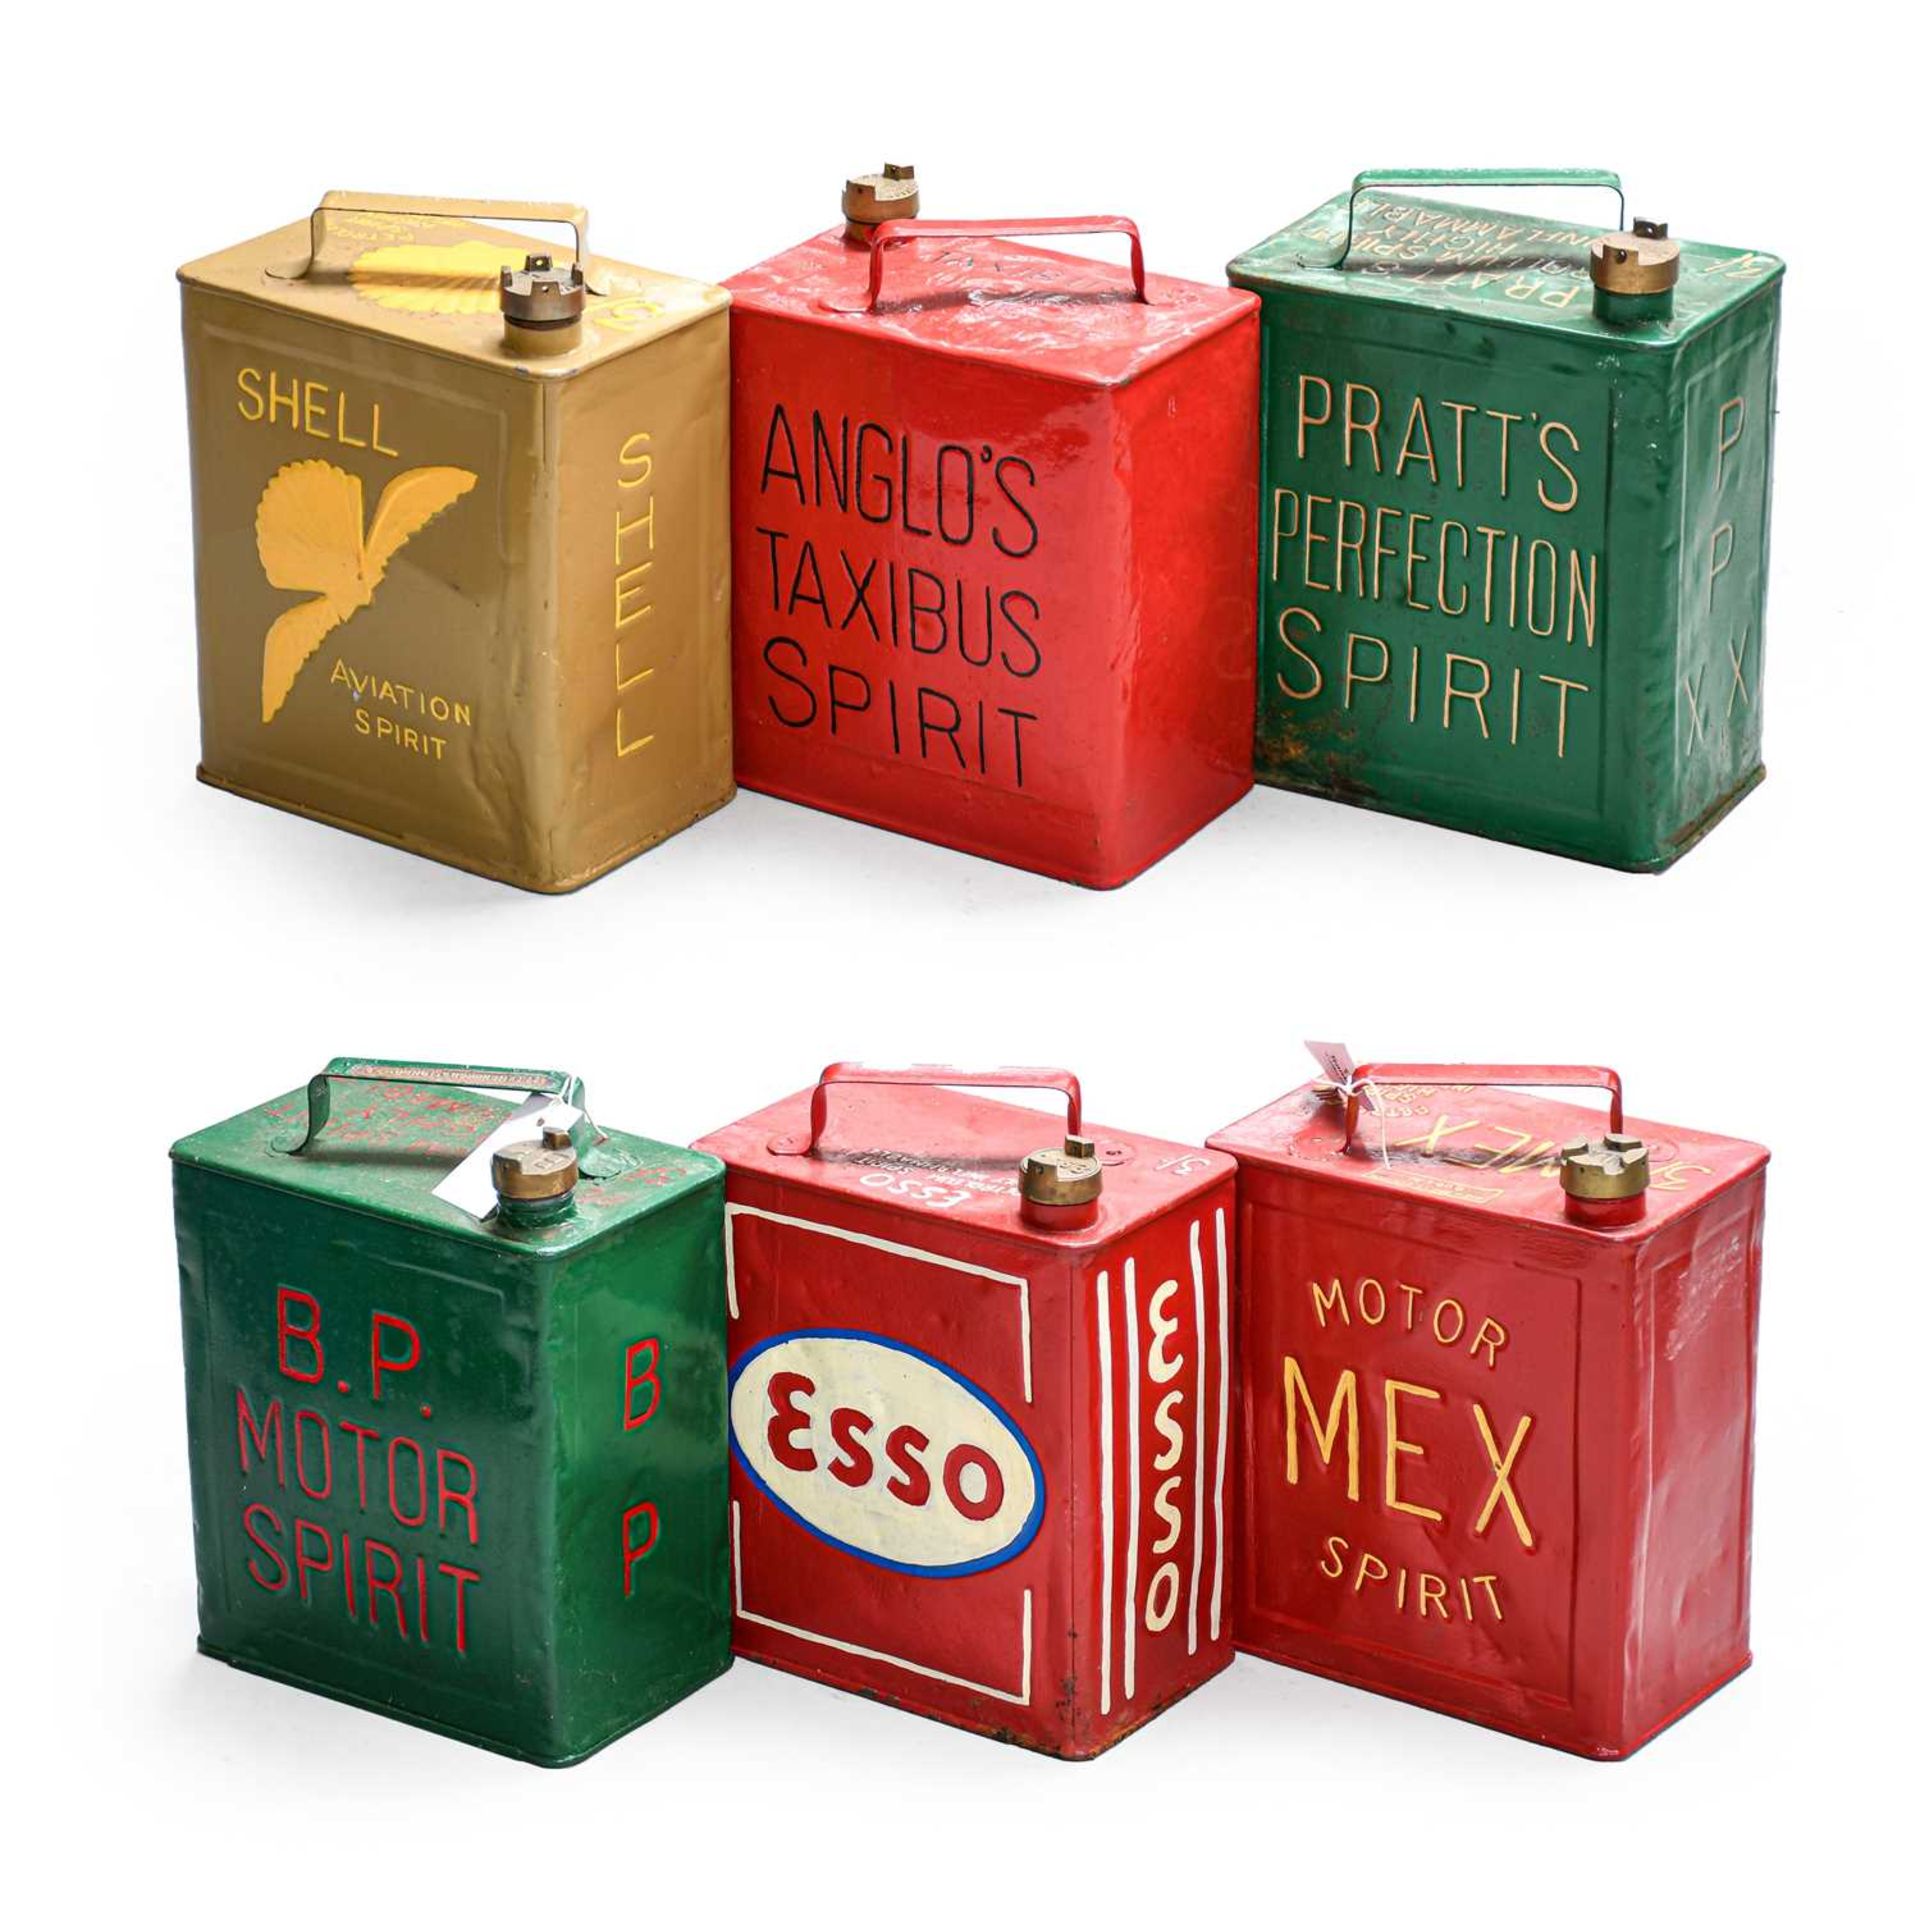 Six Vintage 2-Gallon Fuel Cans, repainted, to include Esso, BP Motor Spirit, Motormex, Shell, Pratts